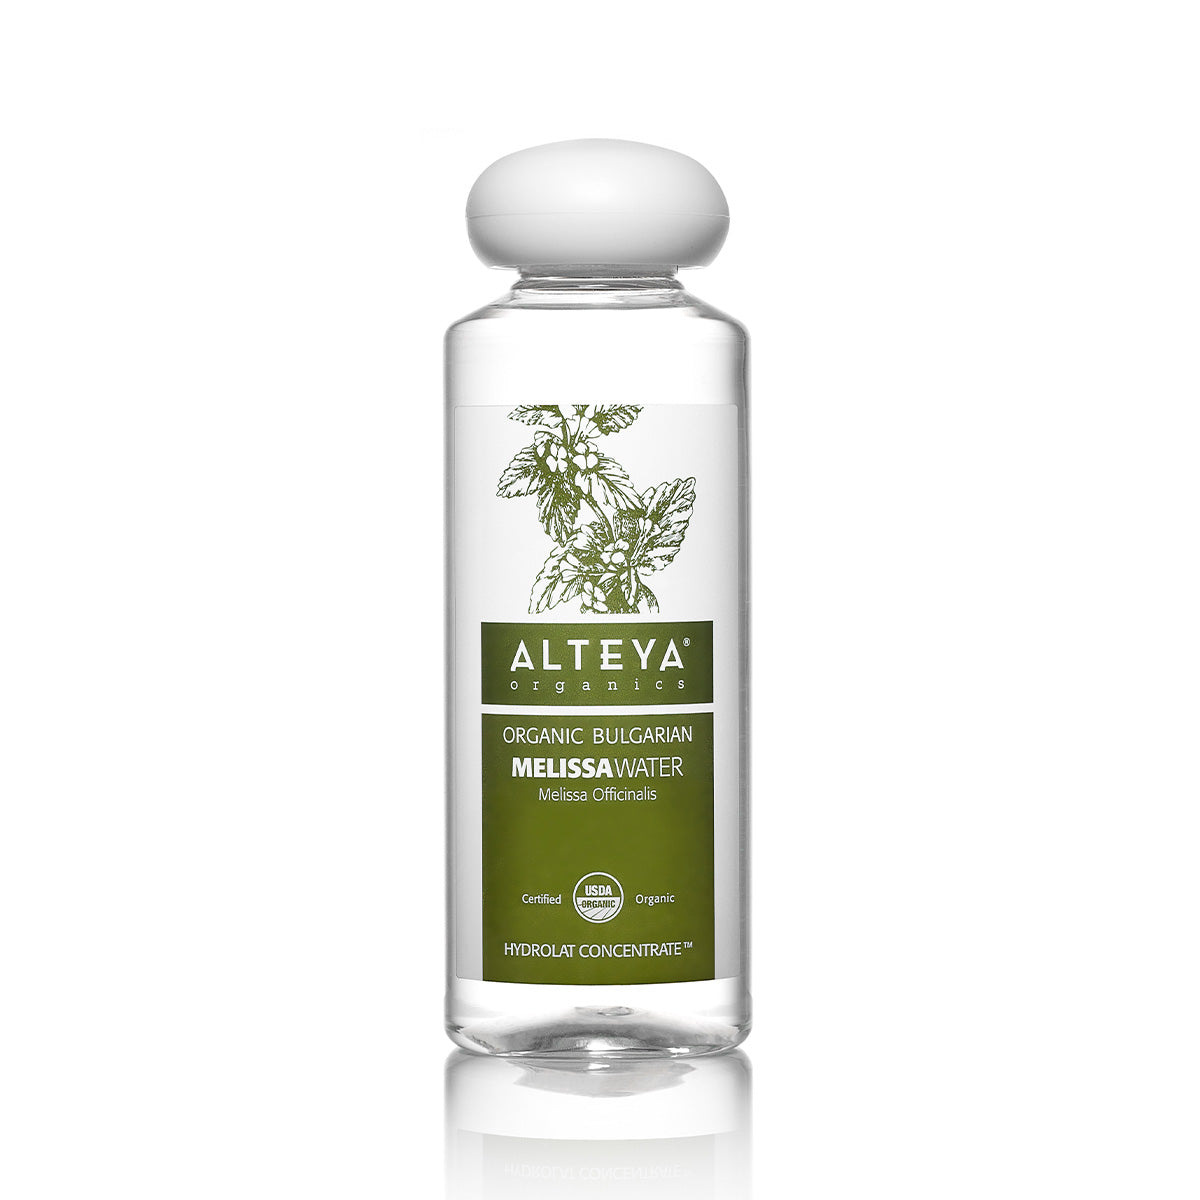 A bottle of Alteya Organics Bulgarian Organic Melissa Water, infused with Melissa Flower Water, to revitalize dull skin on a white background.